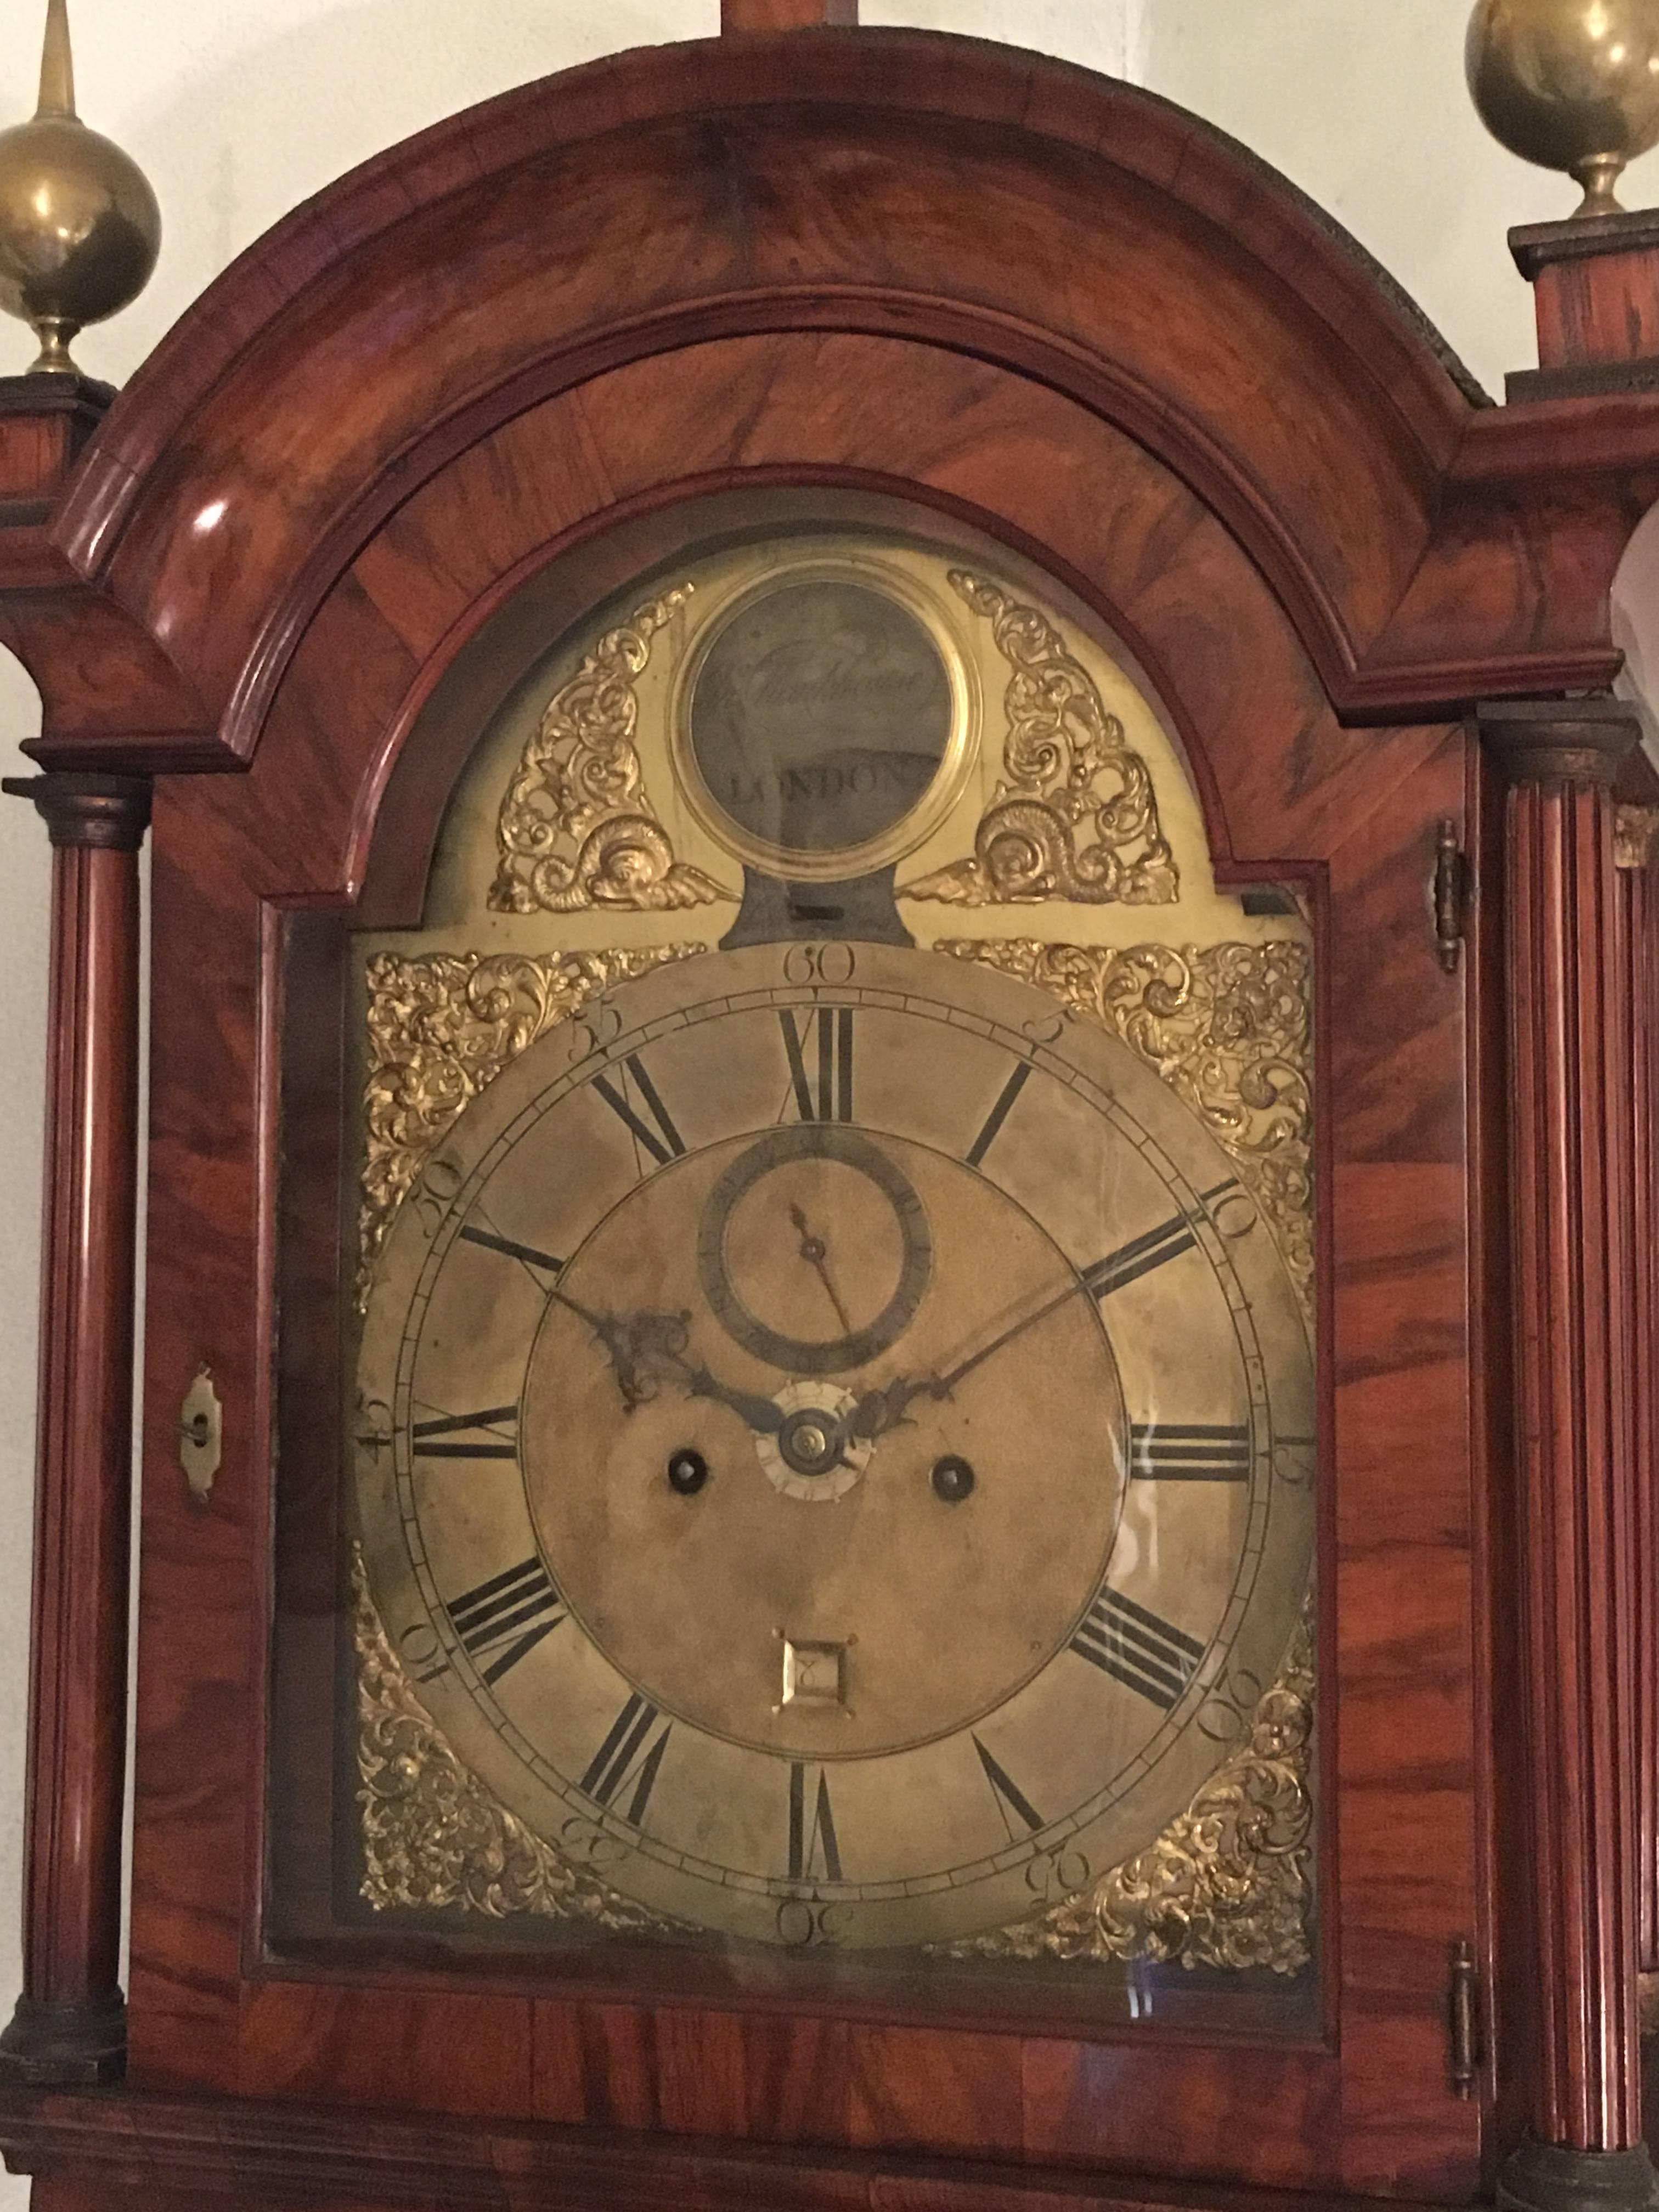 For sale on 1stdibs an English grandfather walnut clock from the 18th century by Monkhouse, London. Working on perfect conditions this long case clock has a honey coloured walnut and three gold metal finials that match the gold colored metal from